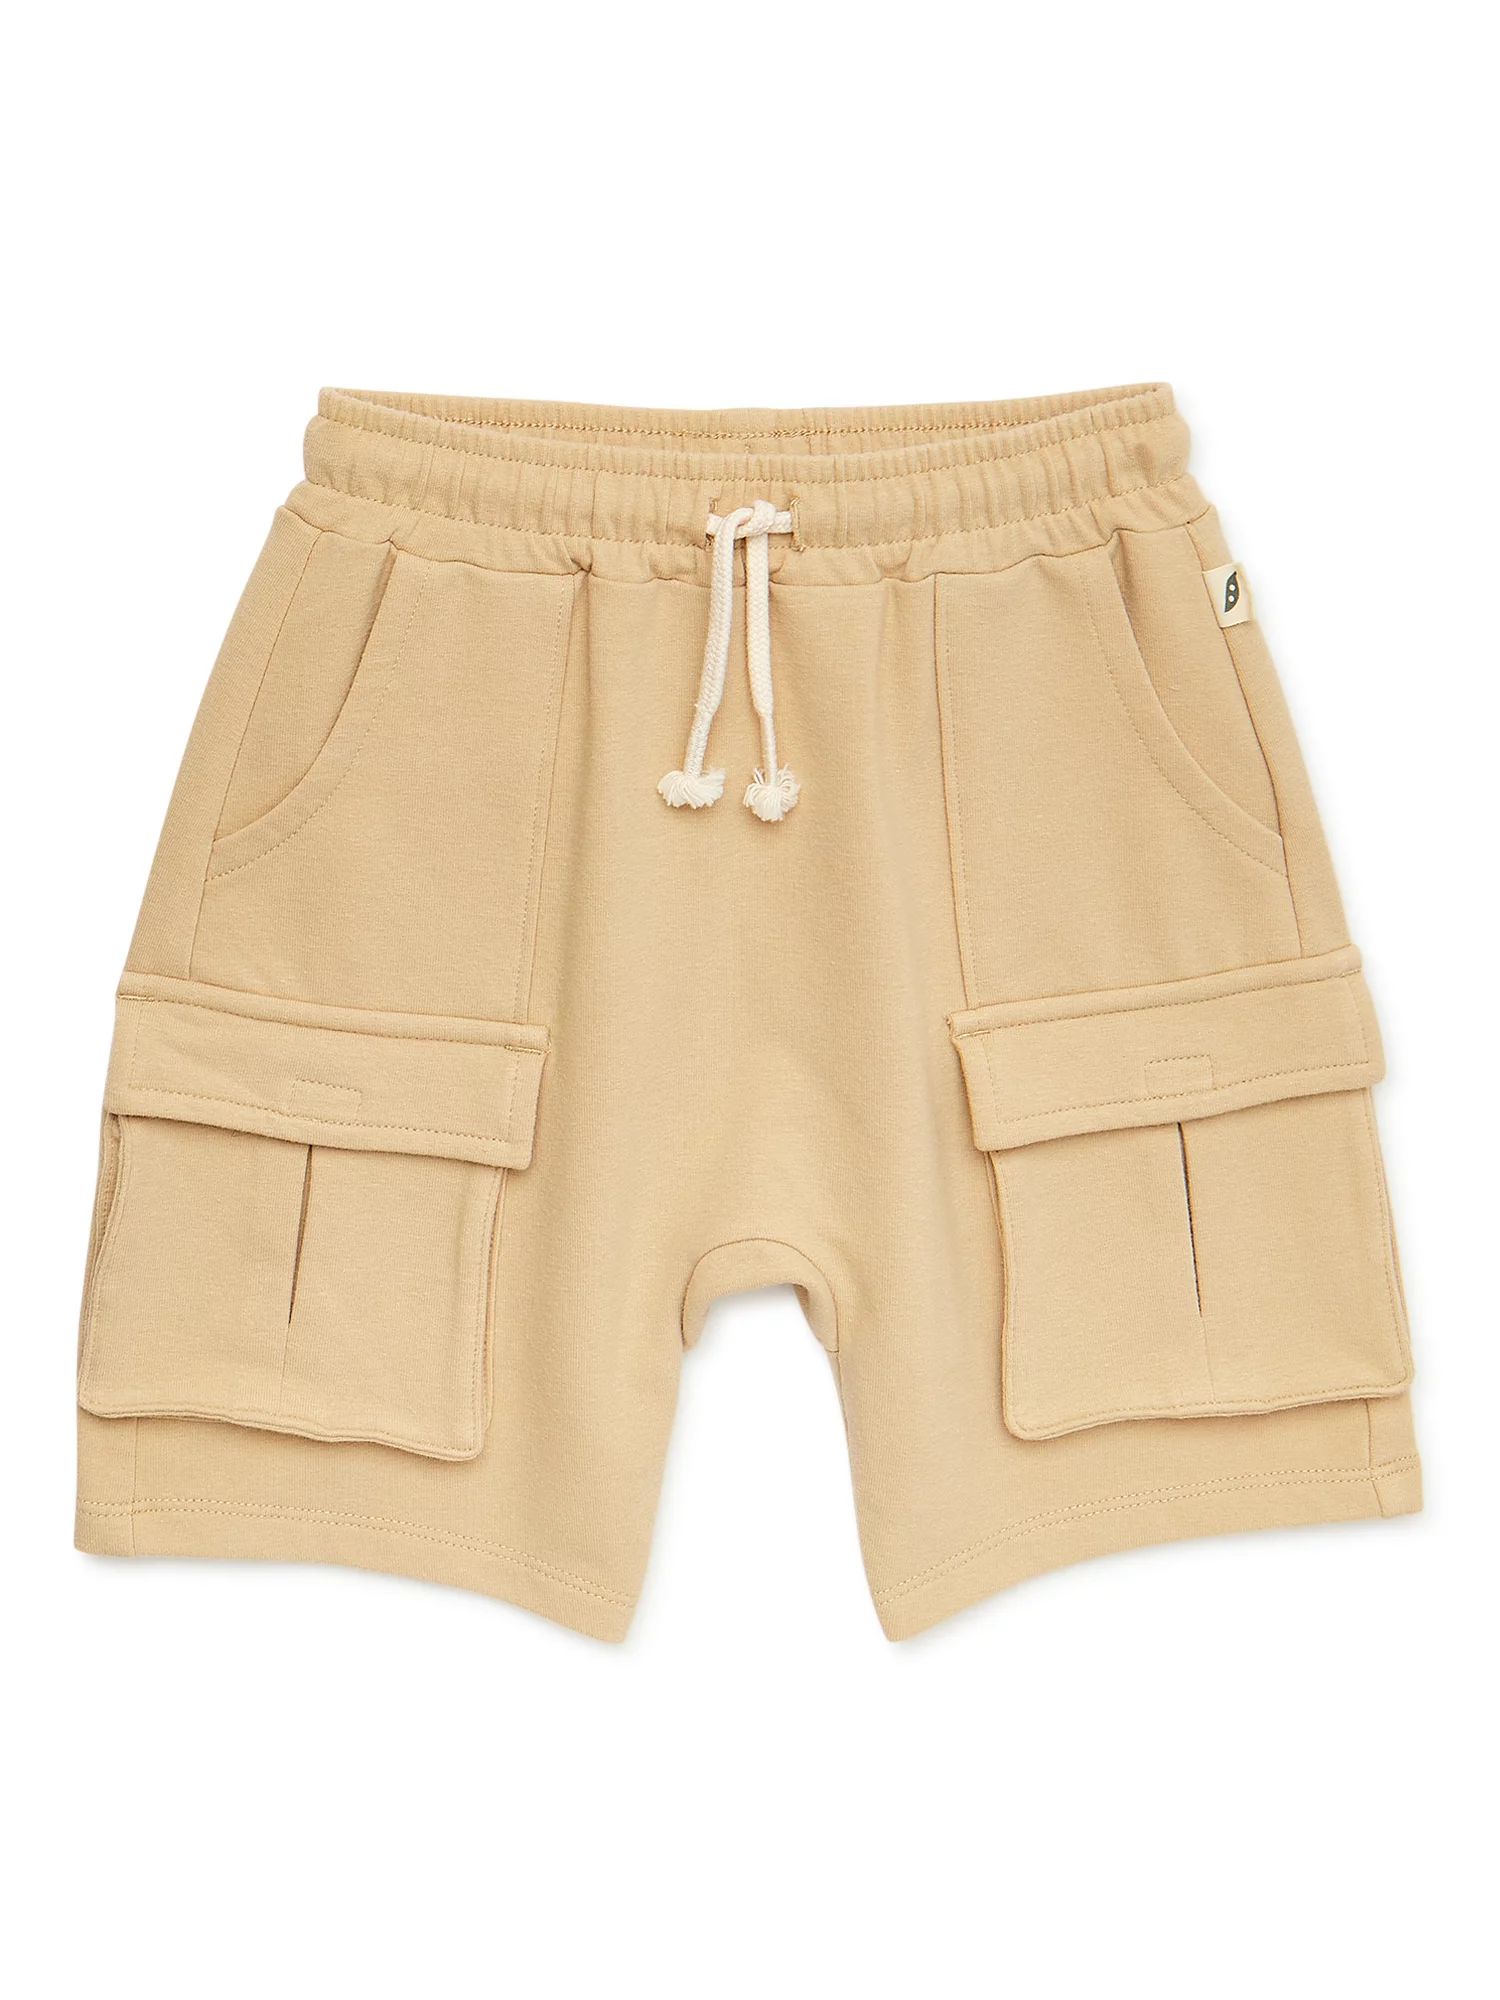 easy-peasy Toddler Boy French Terry Cargo Shorts, Sizes 12 Months-5T | Walmart (US)